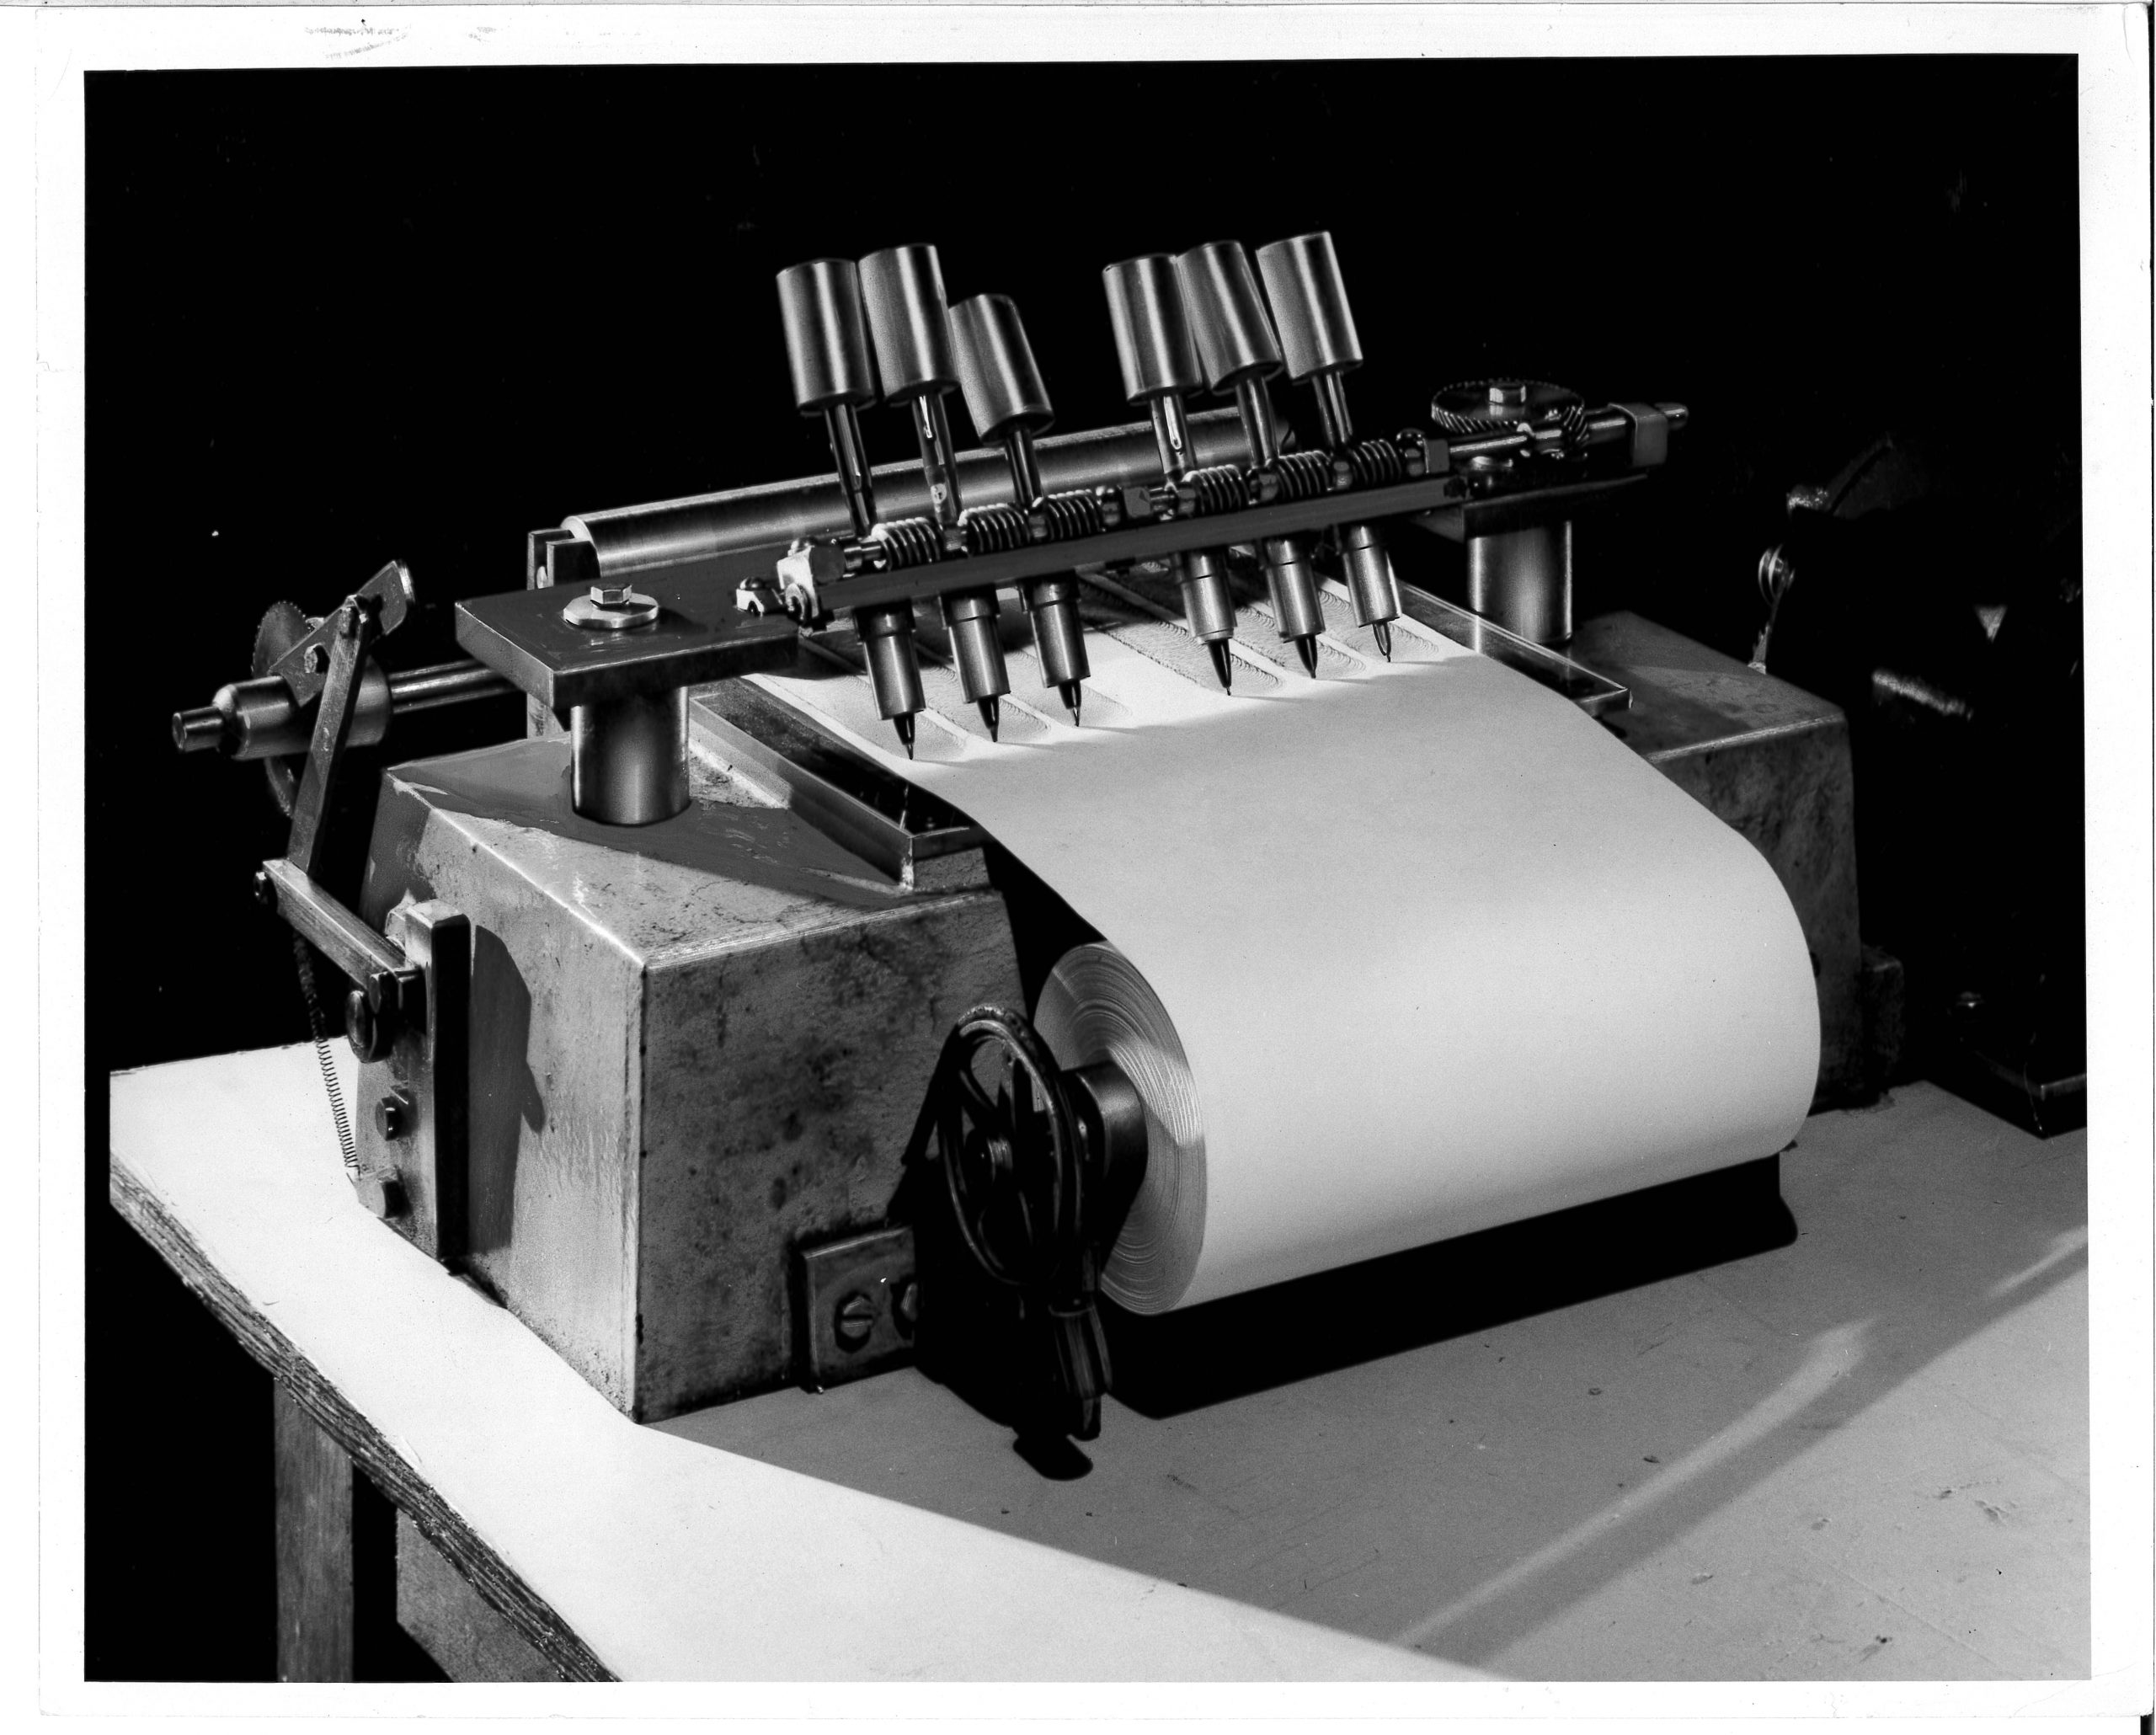 Image showing pen testing equipment with six pens writing on a white sheet of paper.